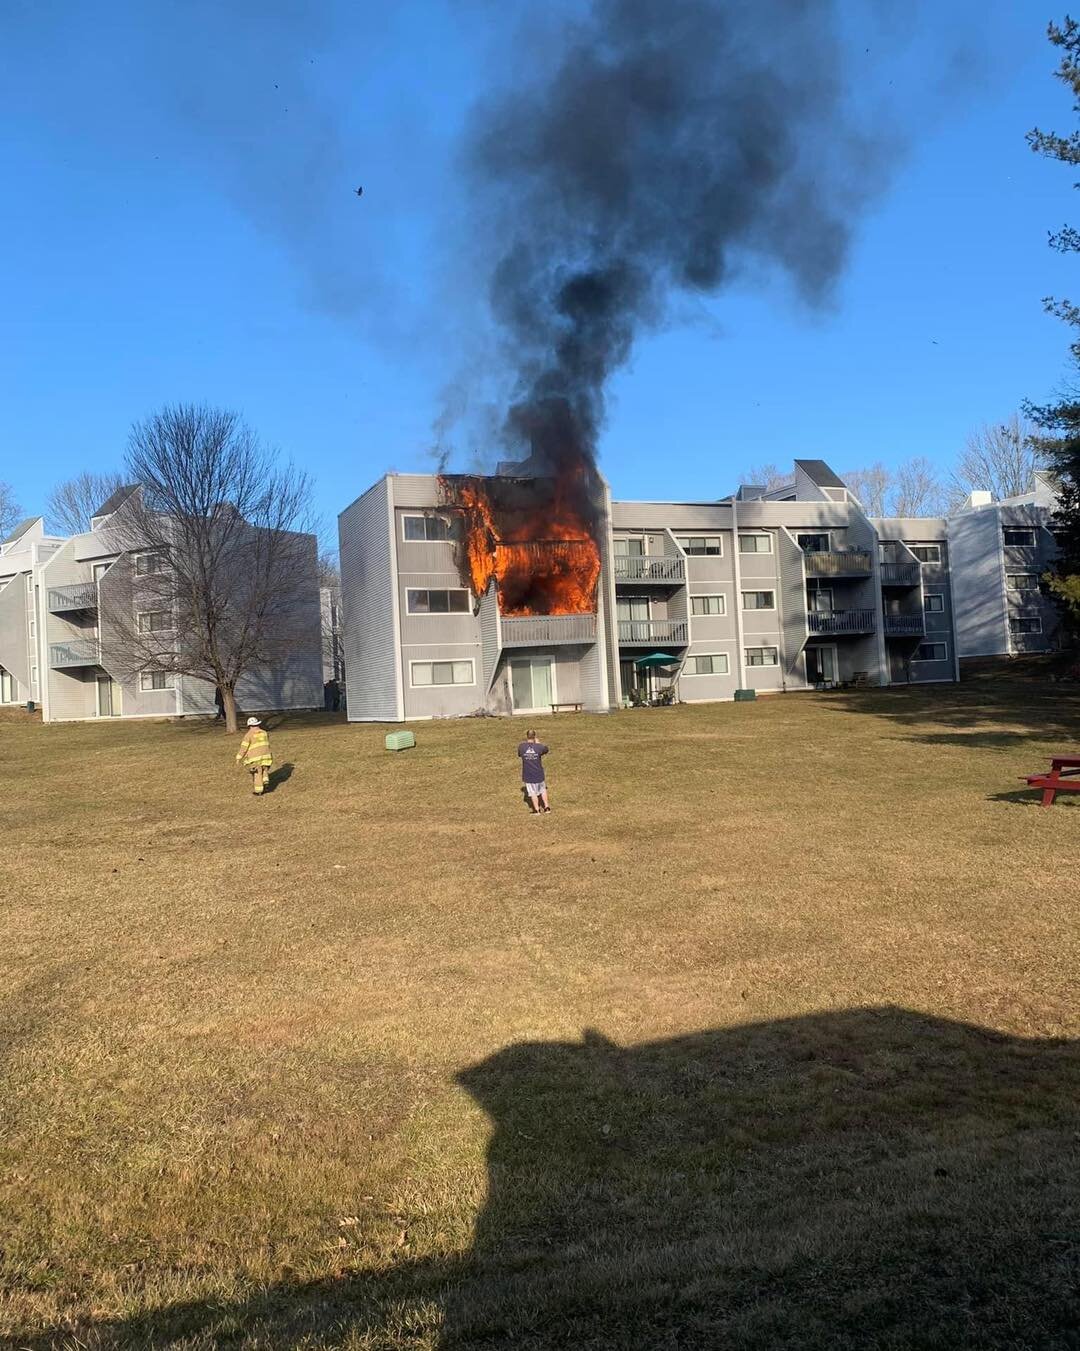 Crews operated at a 2nd alarm fire at an apartment complex in Westfield this morning.